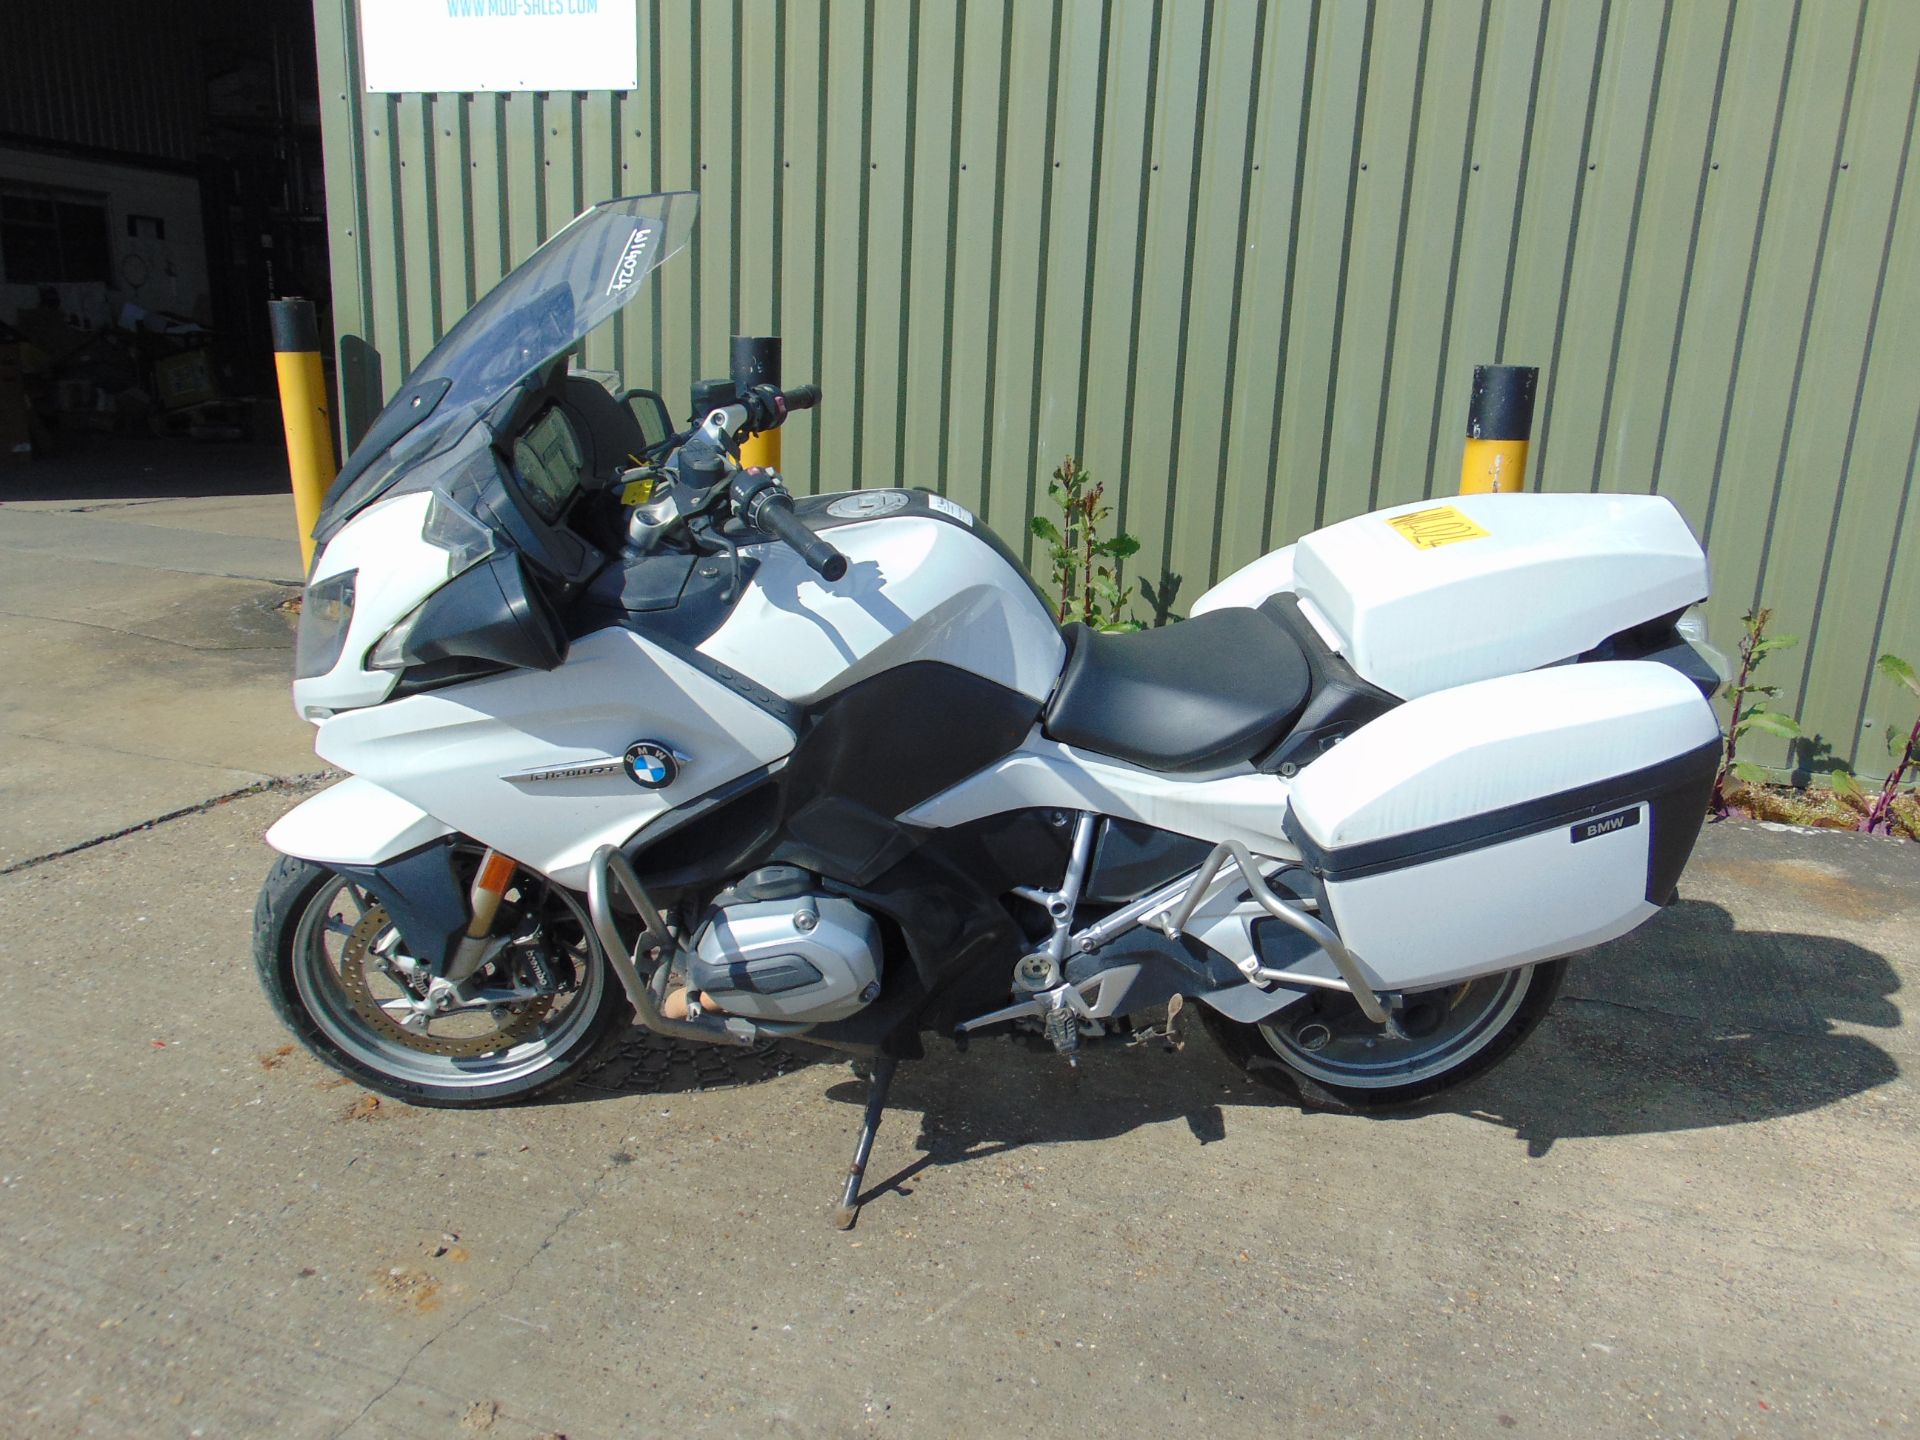 2018 BMW R1200RT Motorbike 50,000 miles from UK Police - Image 2 of 38